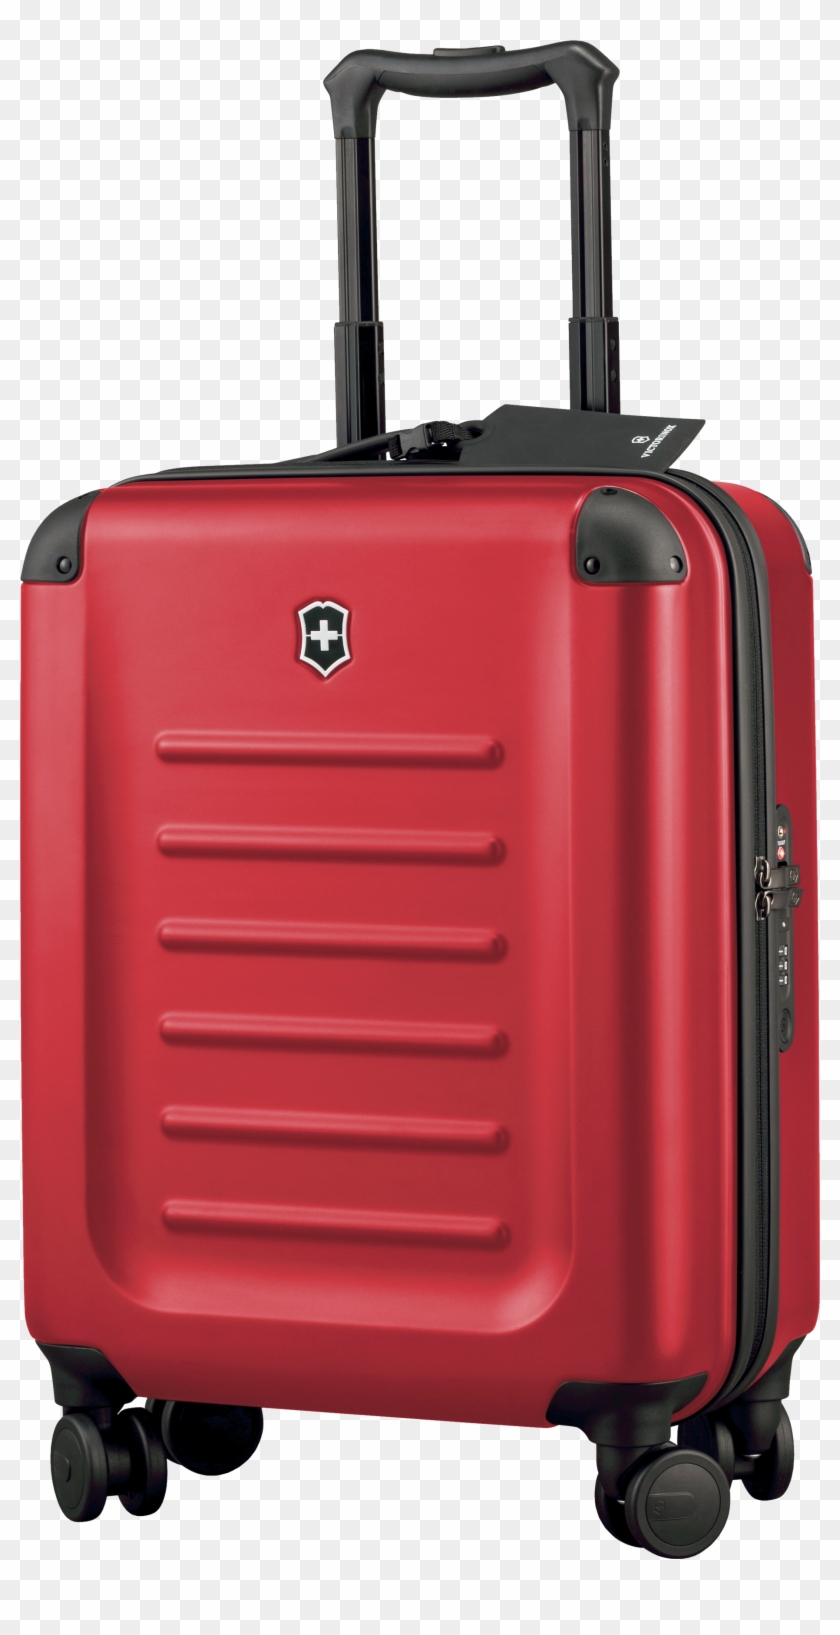 Red Suitcase Png Image - Transparent Background Luggage Png Clipart #222913